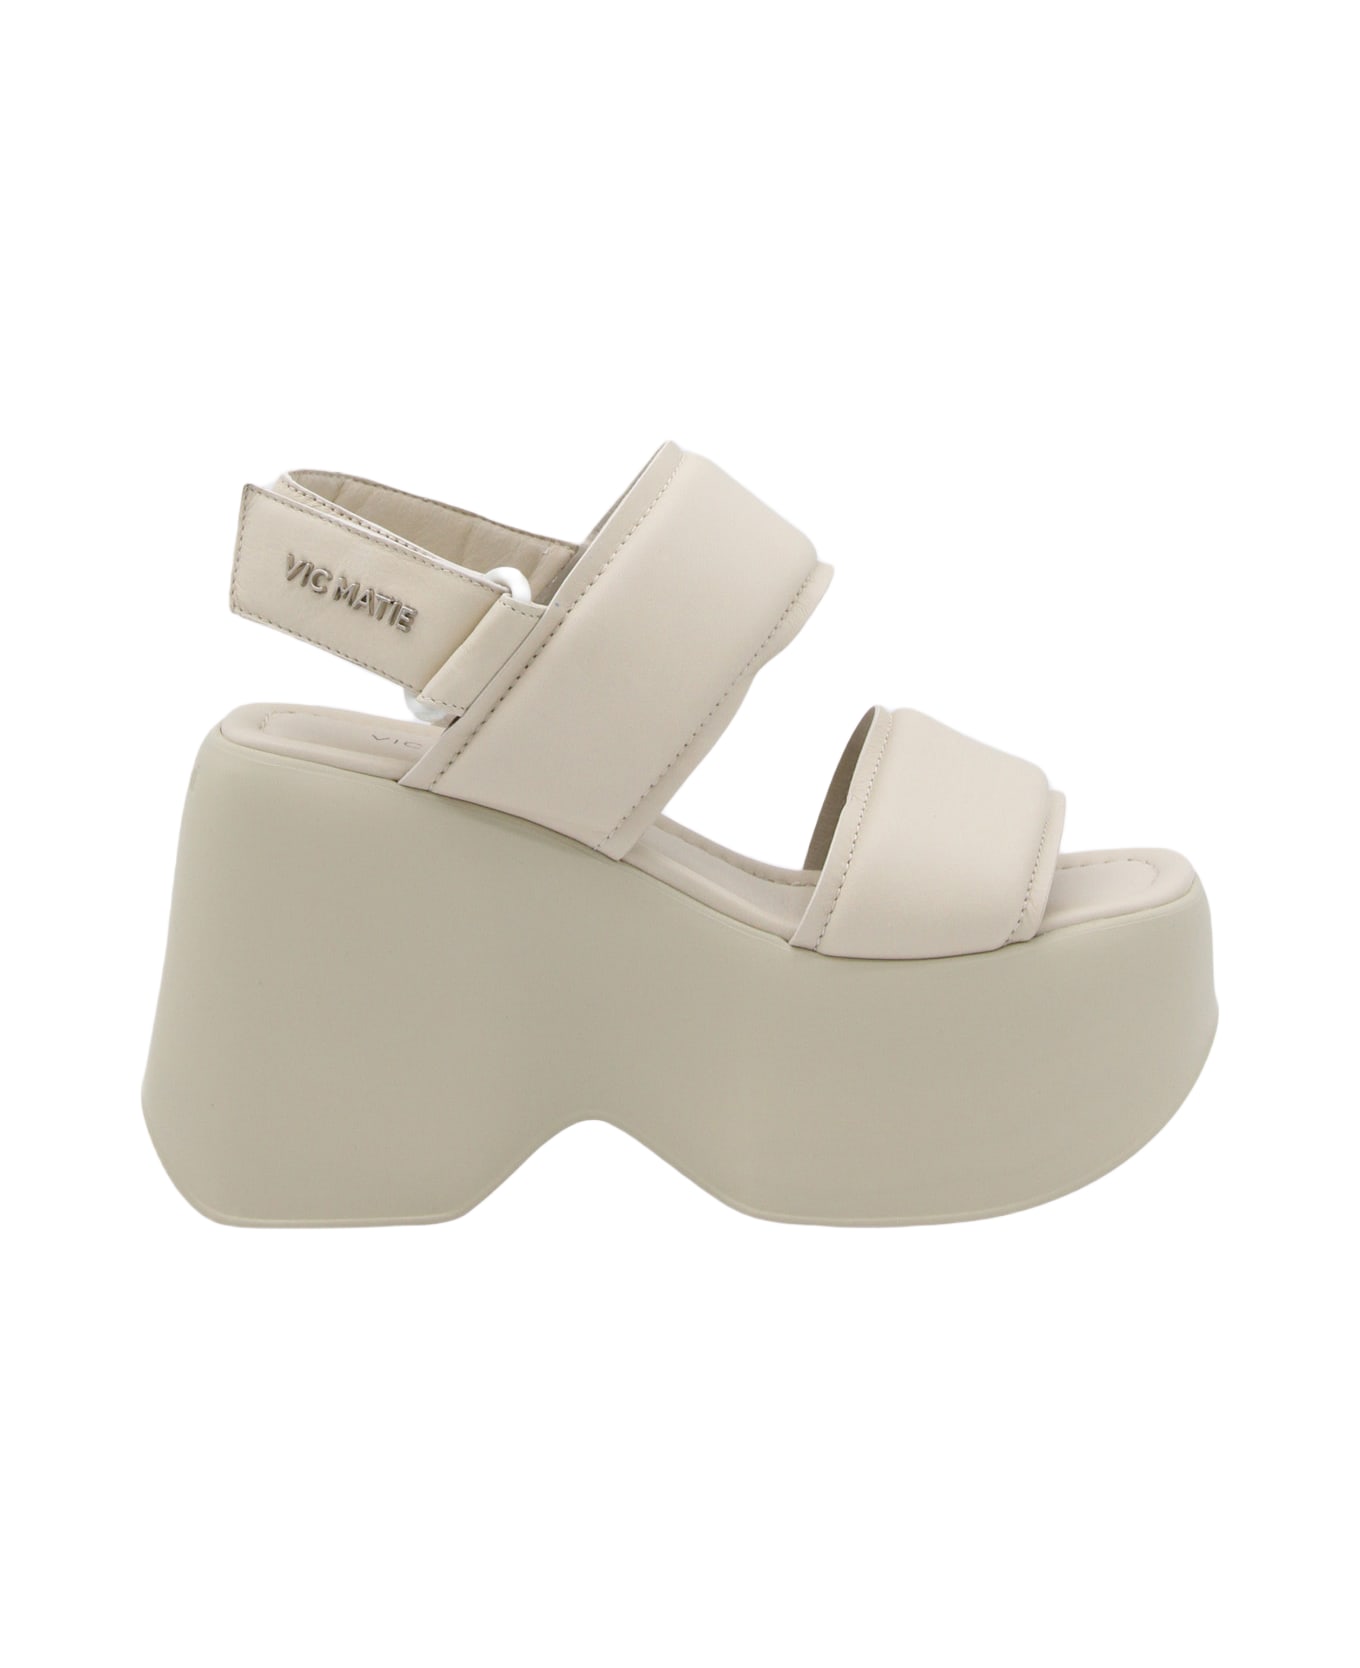 Vic Matié White Leather Platfrom Sandals - Osso サンダル